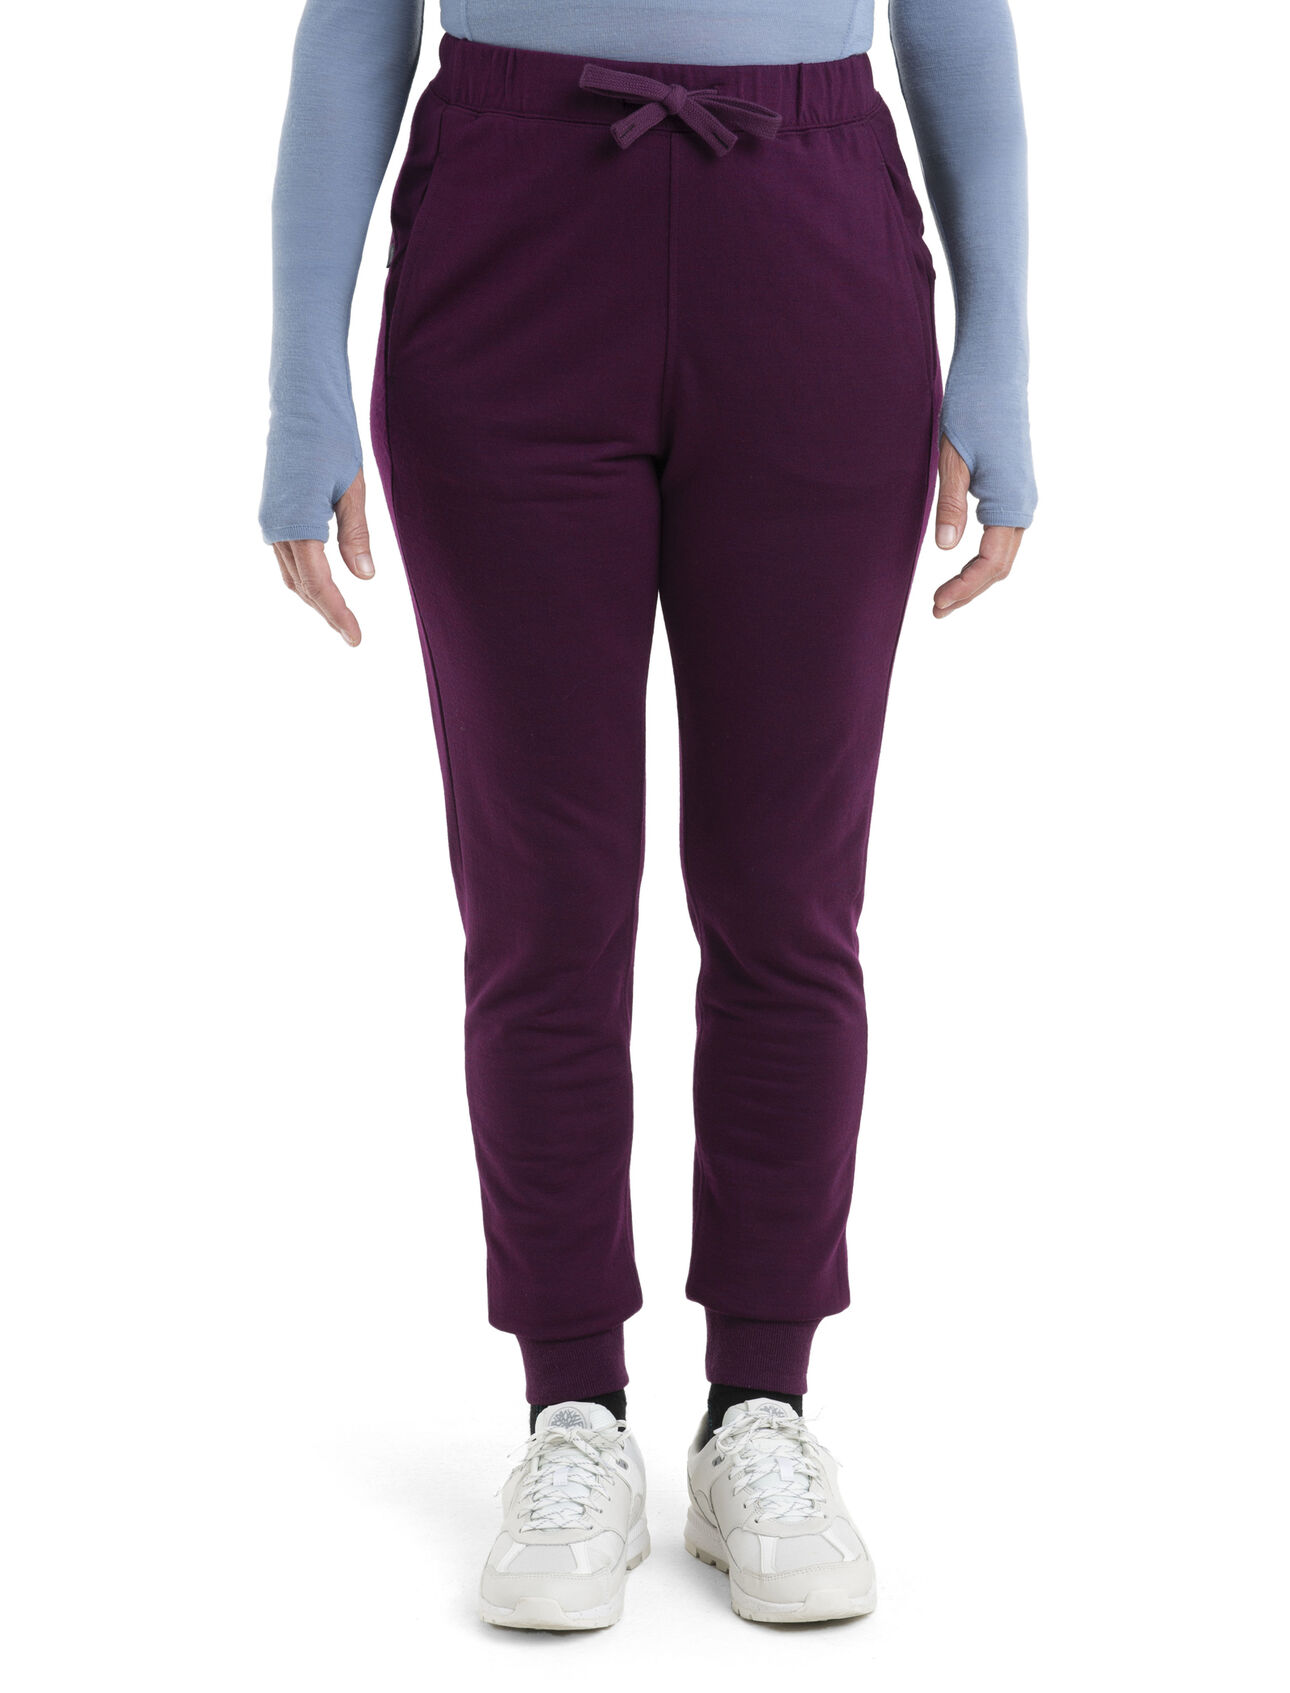 Womens Merino Blend Crush II Pants The ultimate in down-time comfort, the Crush II Pants are versatile jogger-style bottoms featuring our luxuriously soft Eucaform fabric—a blend of natural merino wool and TENCEL™ Lyocell terry fabric.